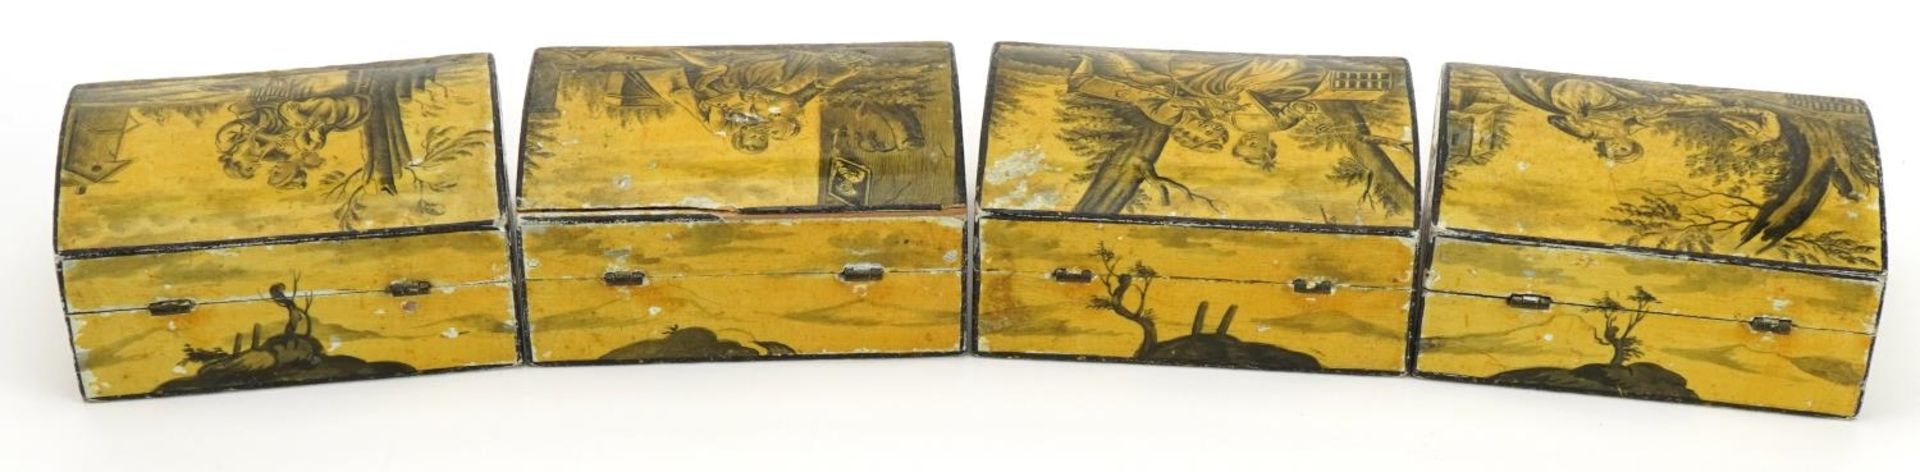 Four 19th century continental lacquered dome top boxes hand painted with classical figures in - Image 3 of 4